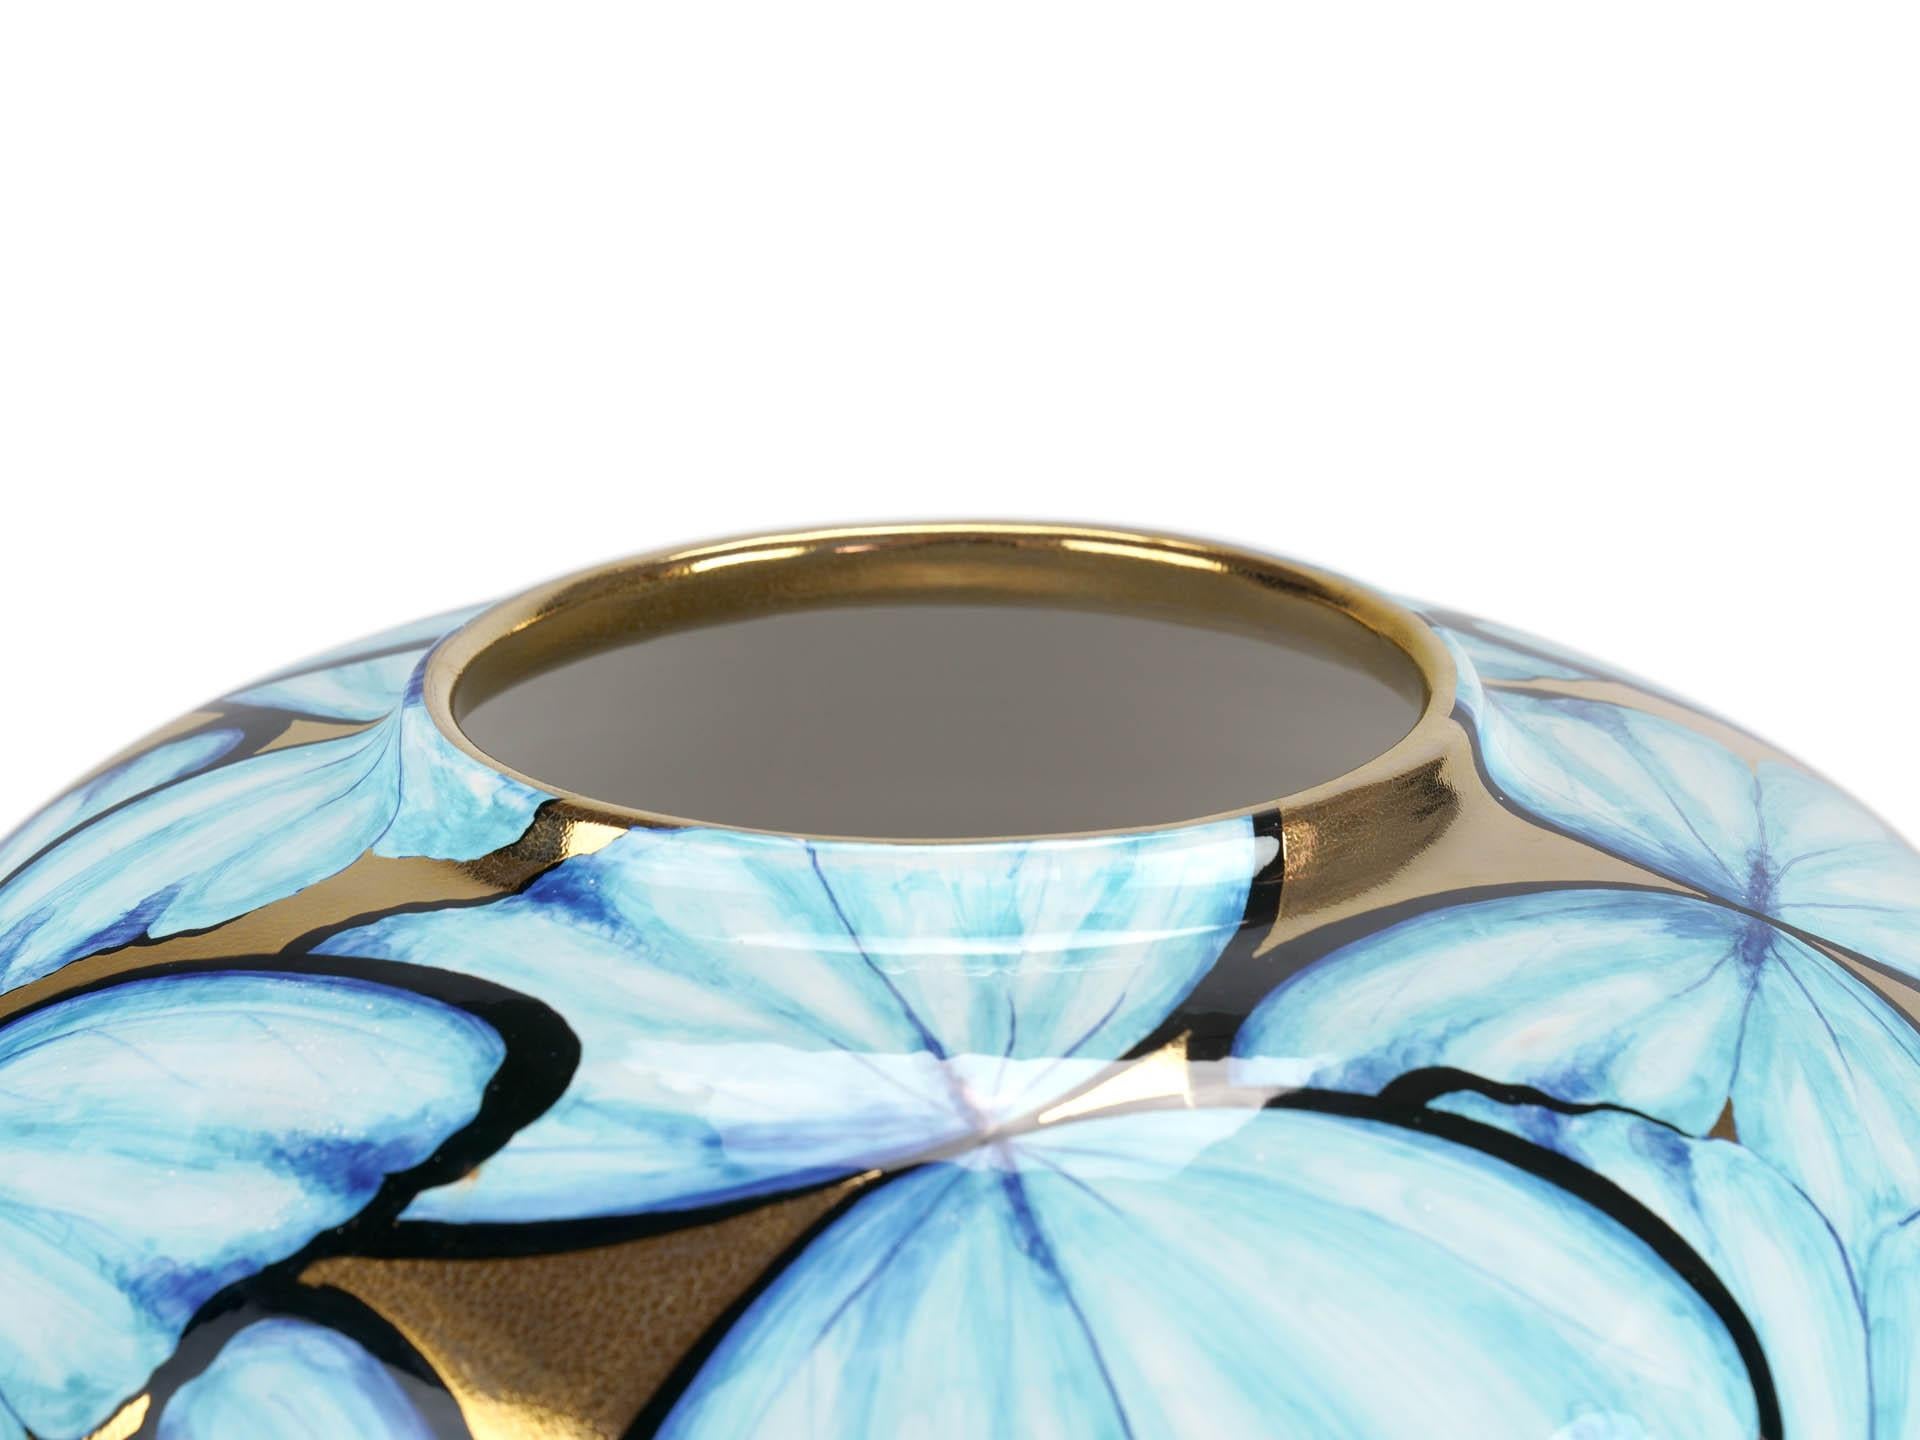 Italian Hand-Painted Ceramic Vase Blue Butterflies on 24kt Gold Accented Surface For Sale 2